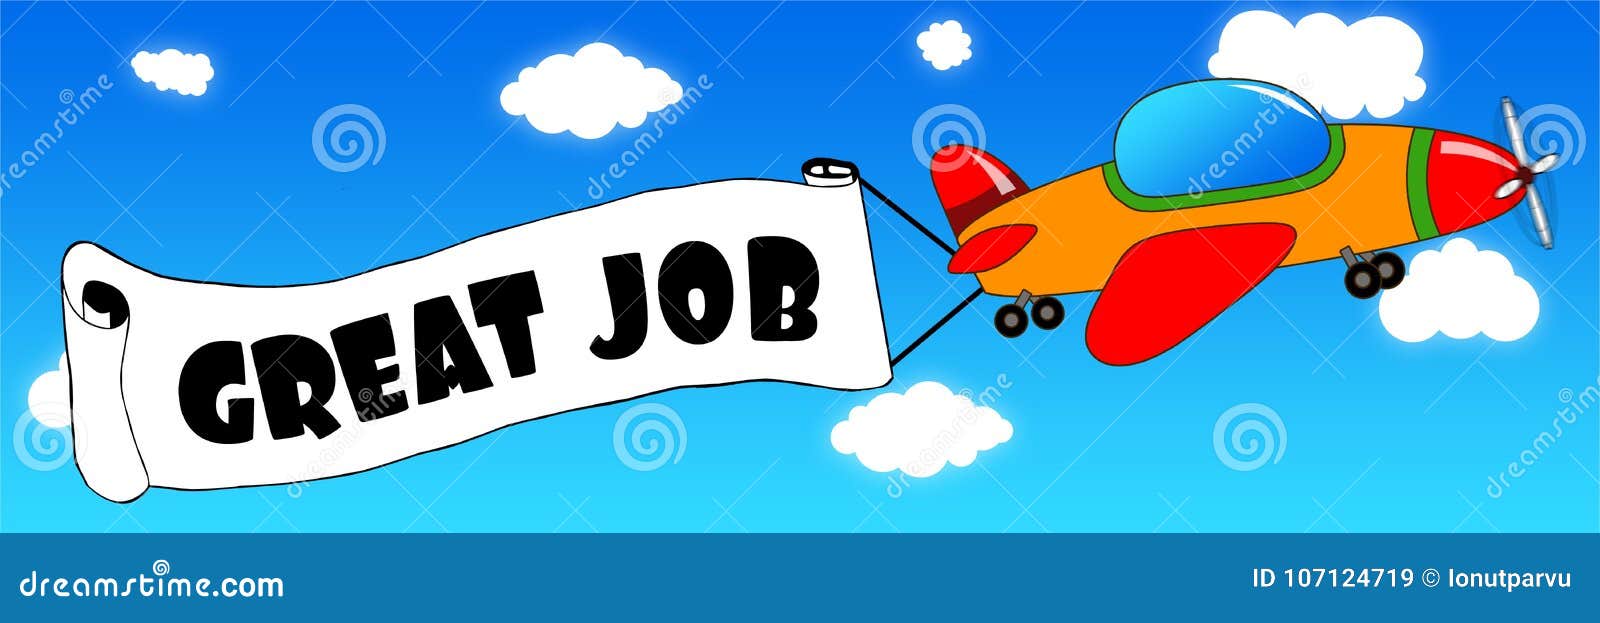 Cartoon Aeroplane and Banner with GREAT JOB Text on a Blue Sky B Stock  Illustration - Illustration of icon, message: 107124719